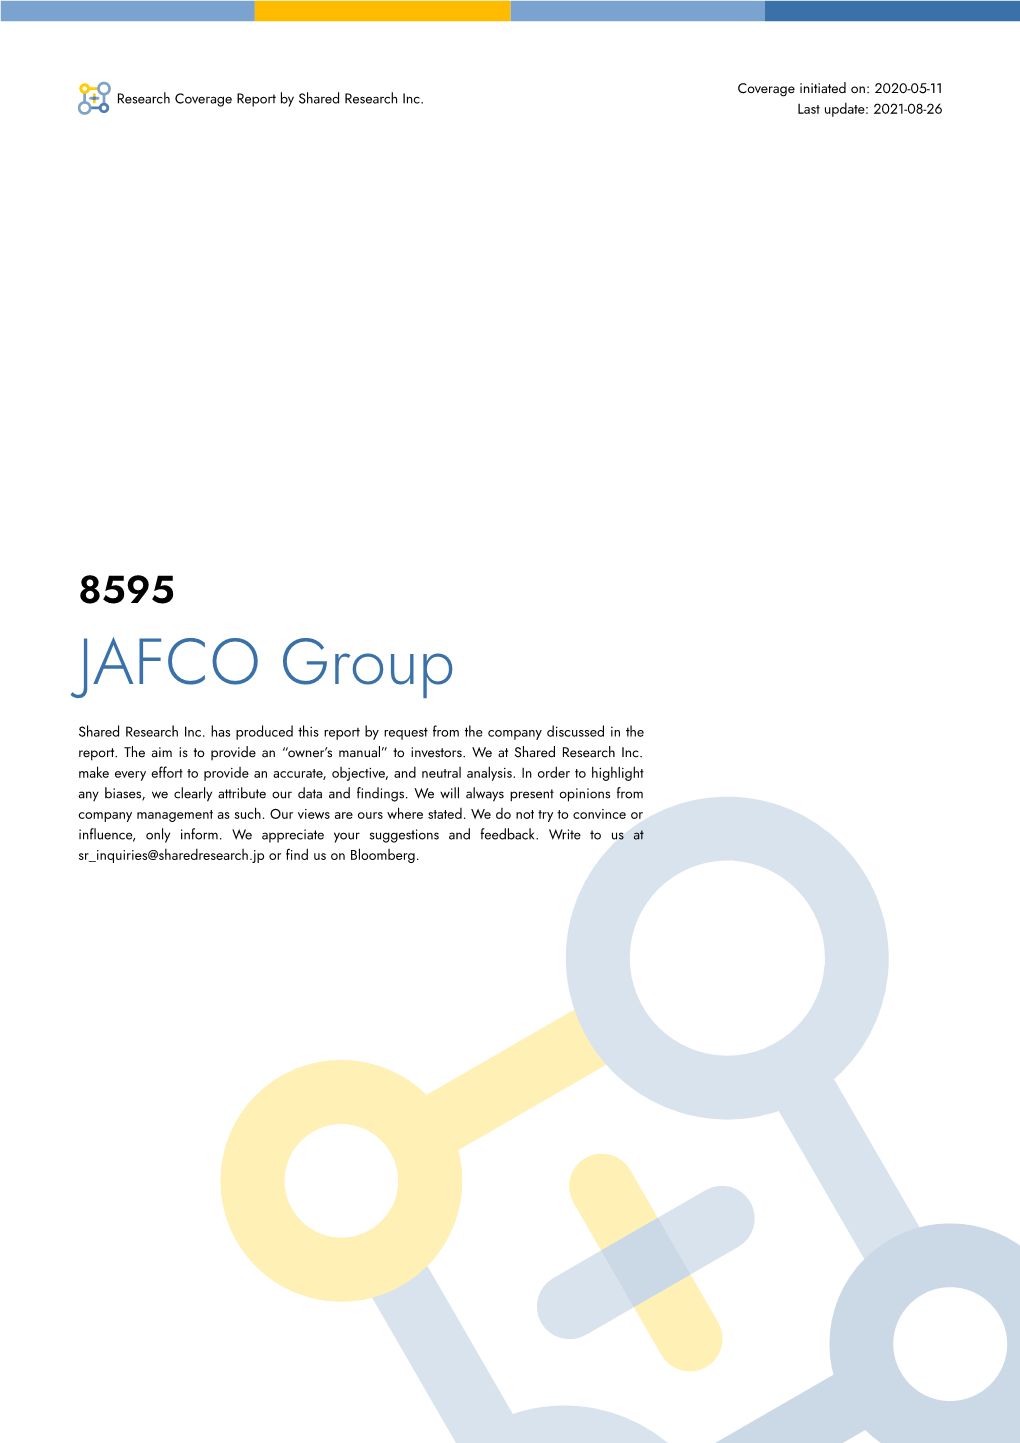 8595 JAFCO Group